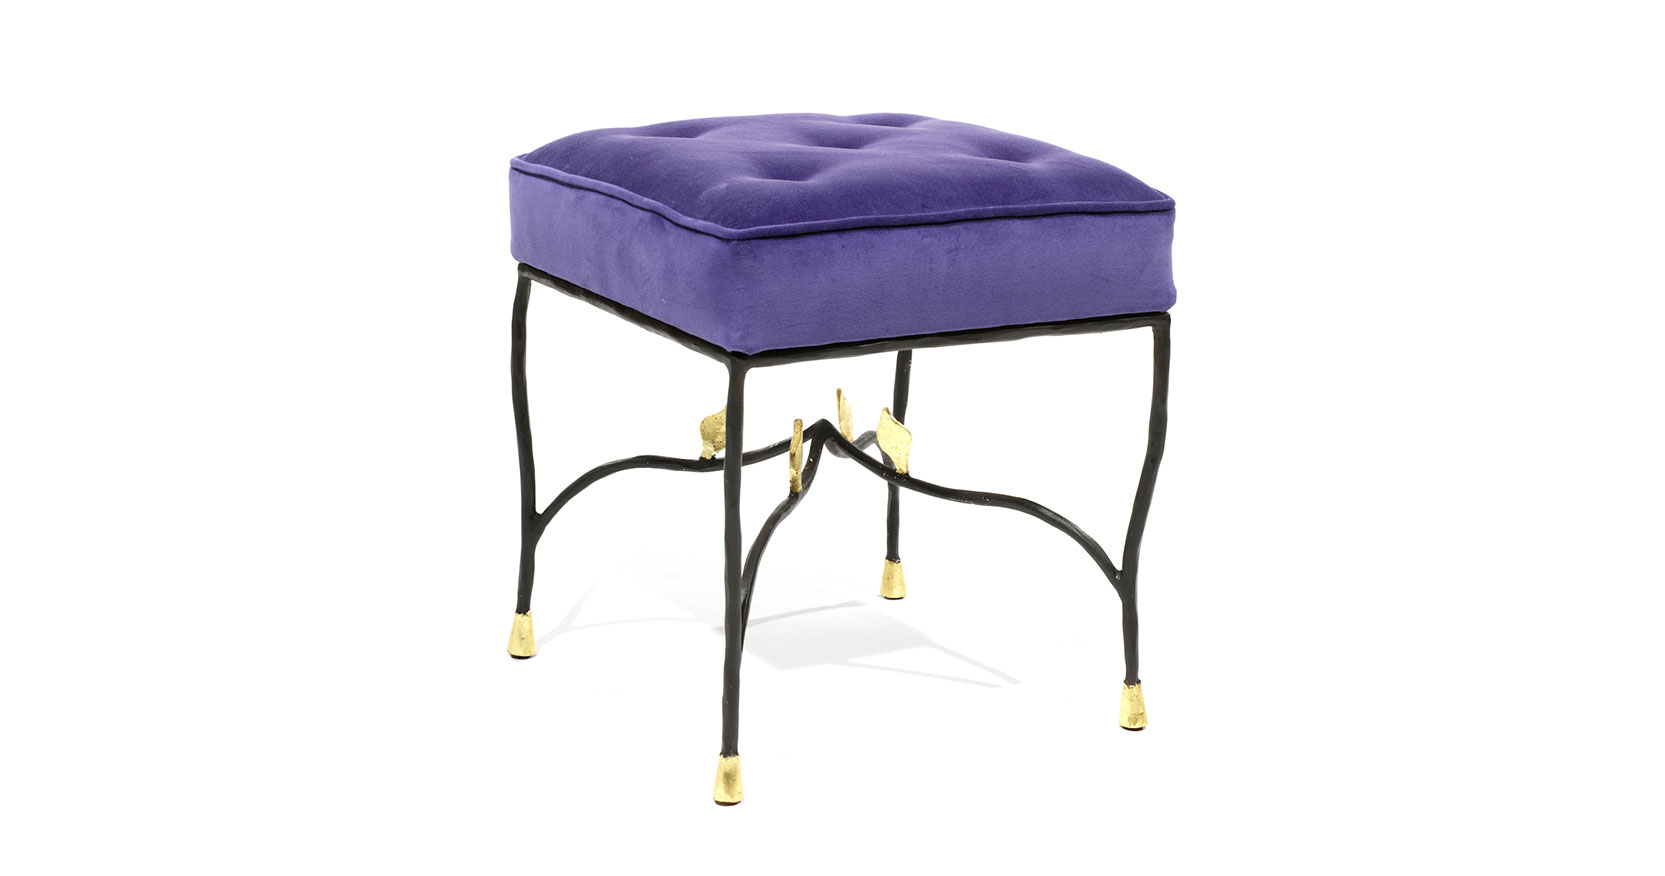 Garouste Bonetti, baroque stool in black wrought iron, with small gold metal leaves under the upholstered and buttoned purple velvet seat